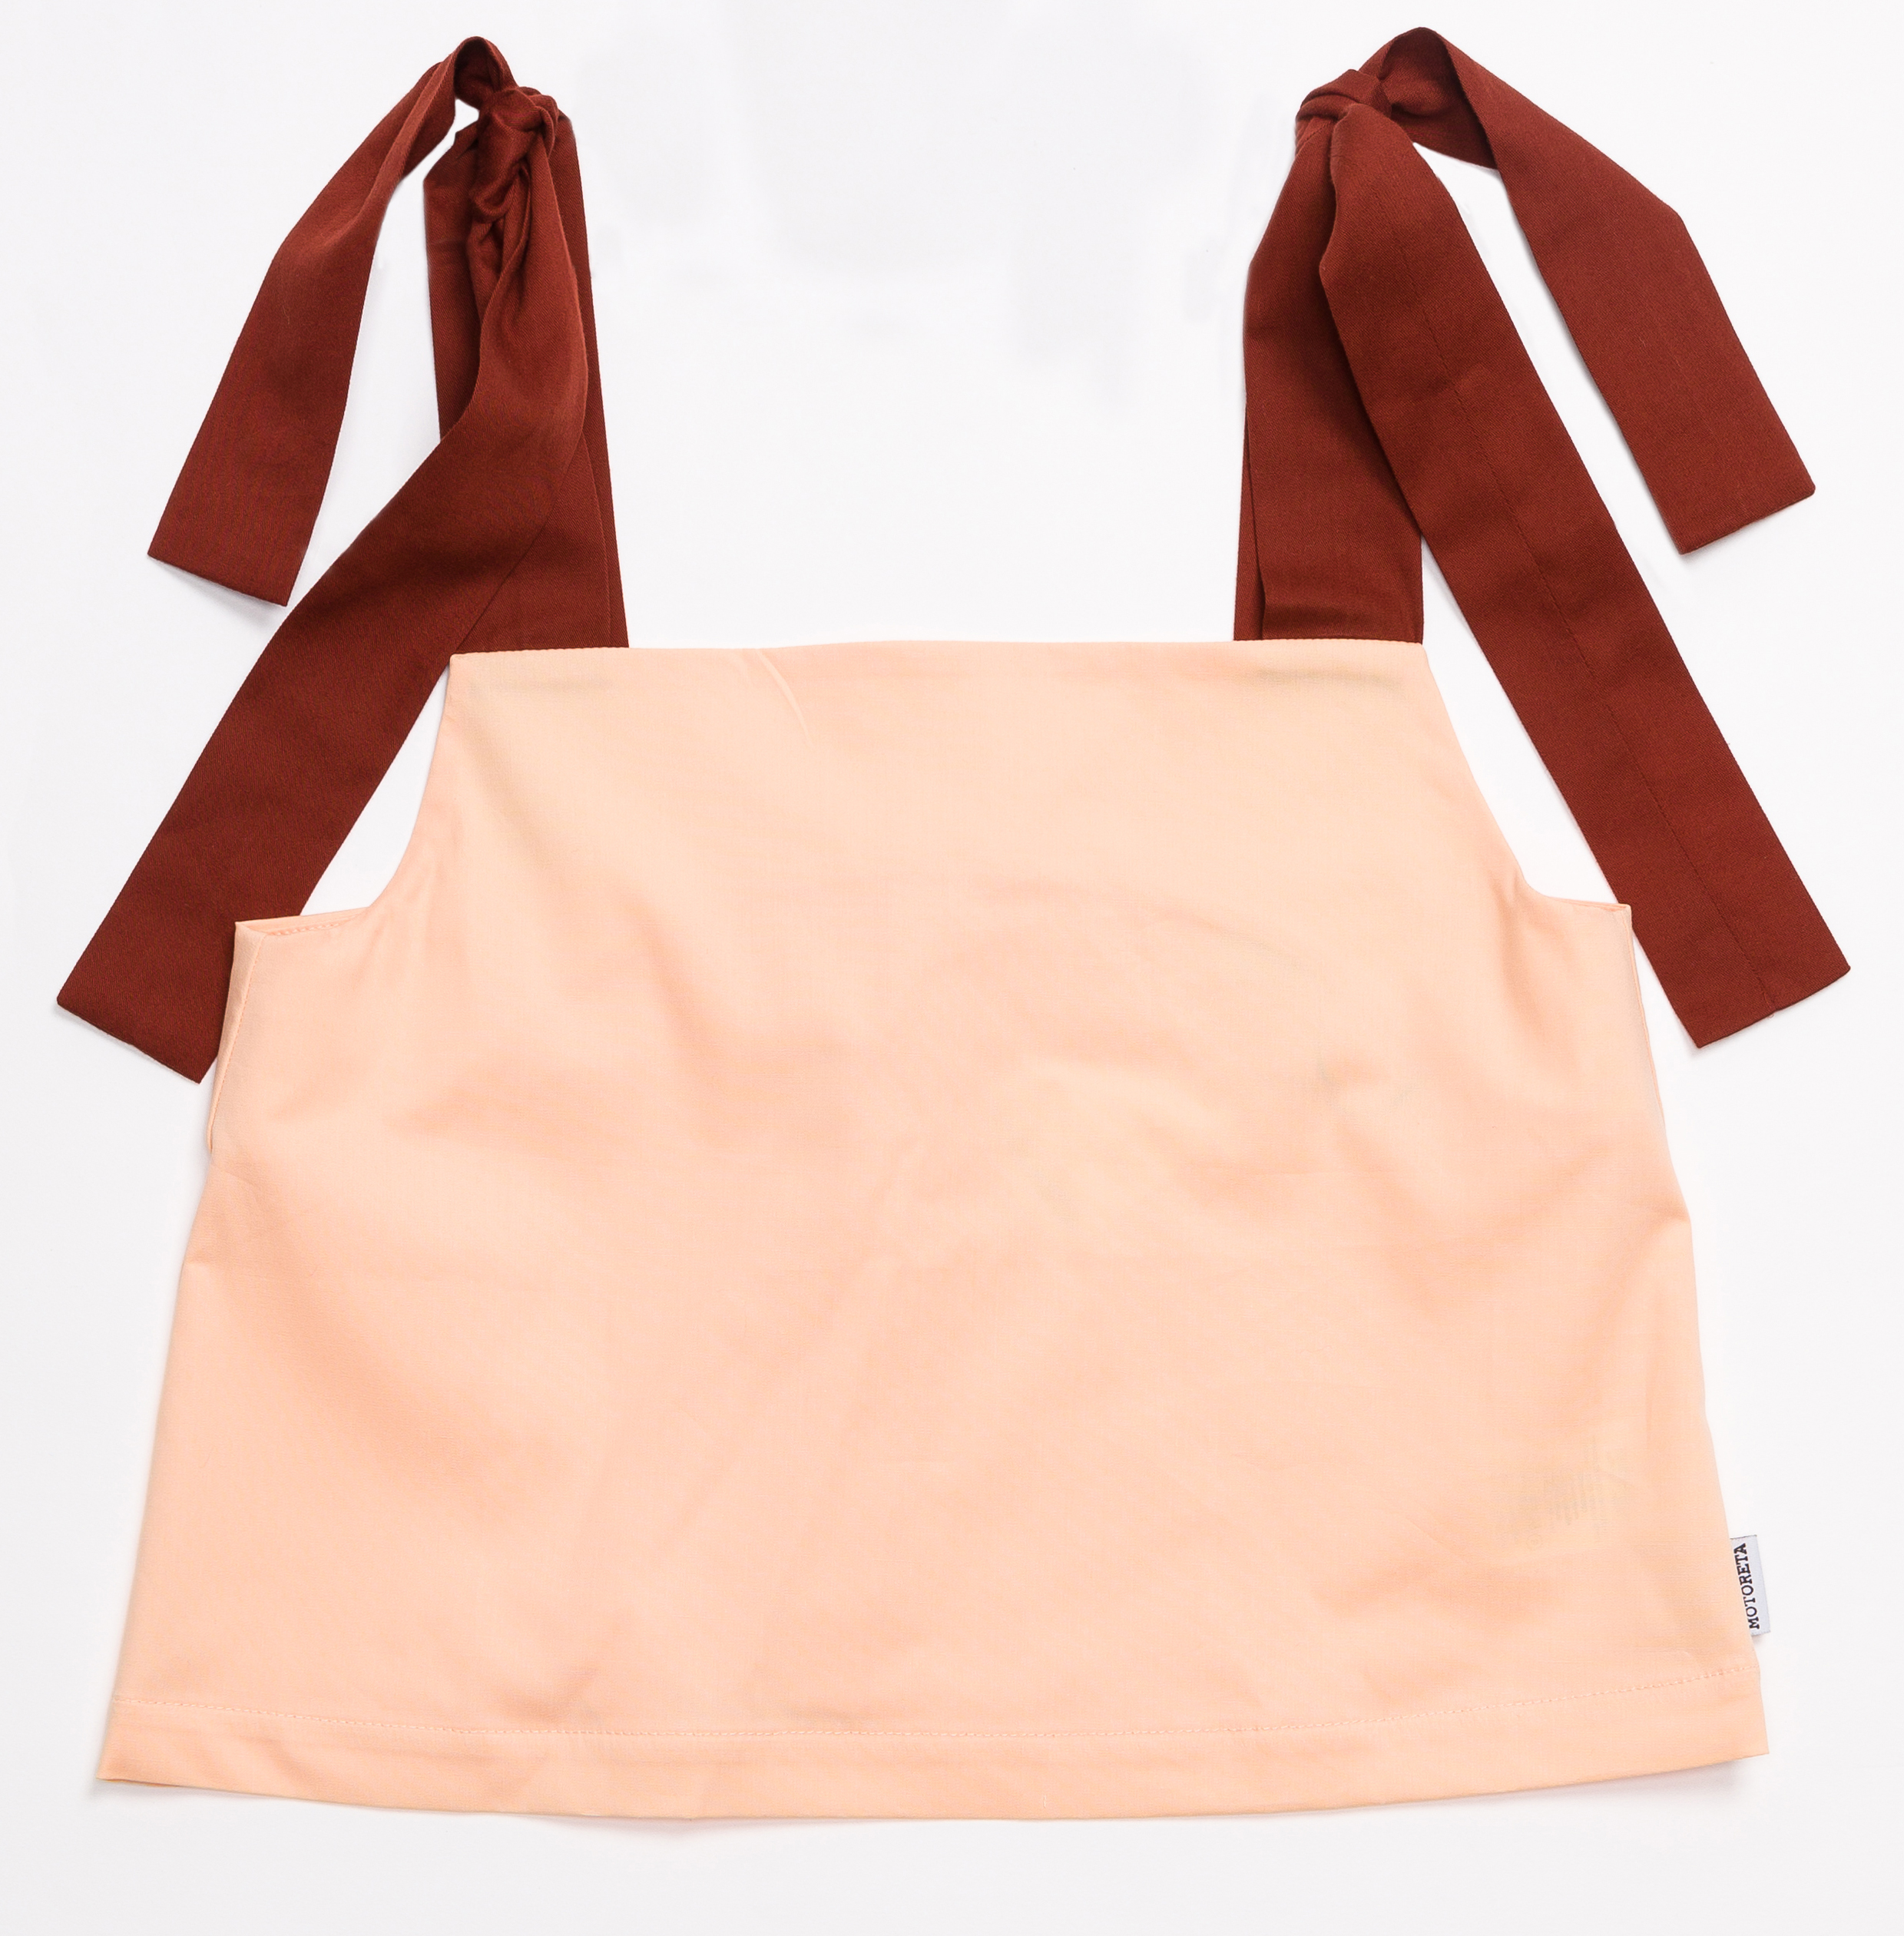                                                                                                                                              Canos Blouse-Pink 